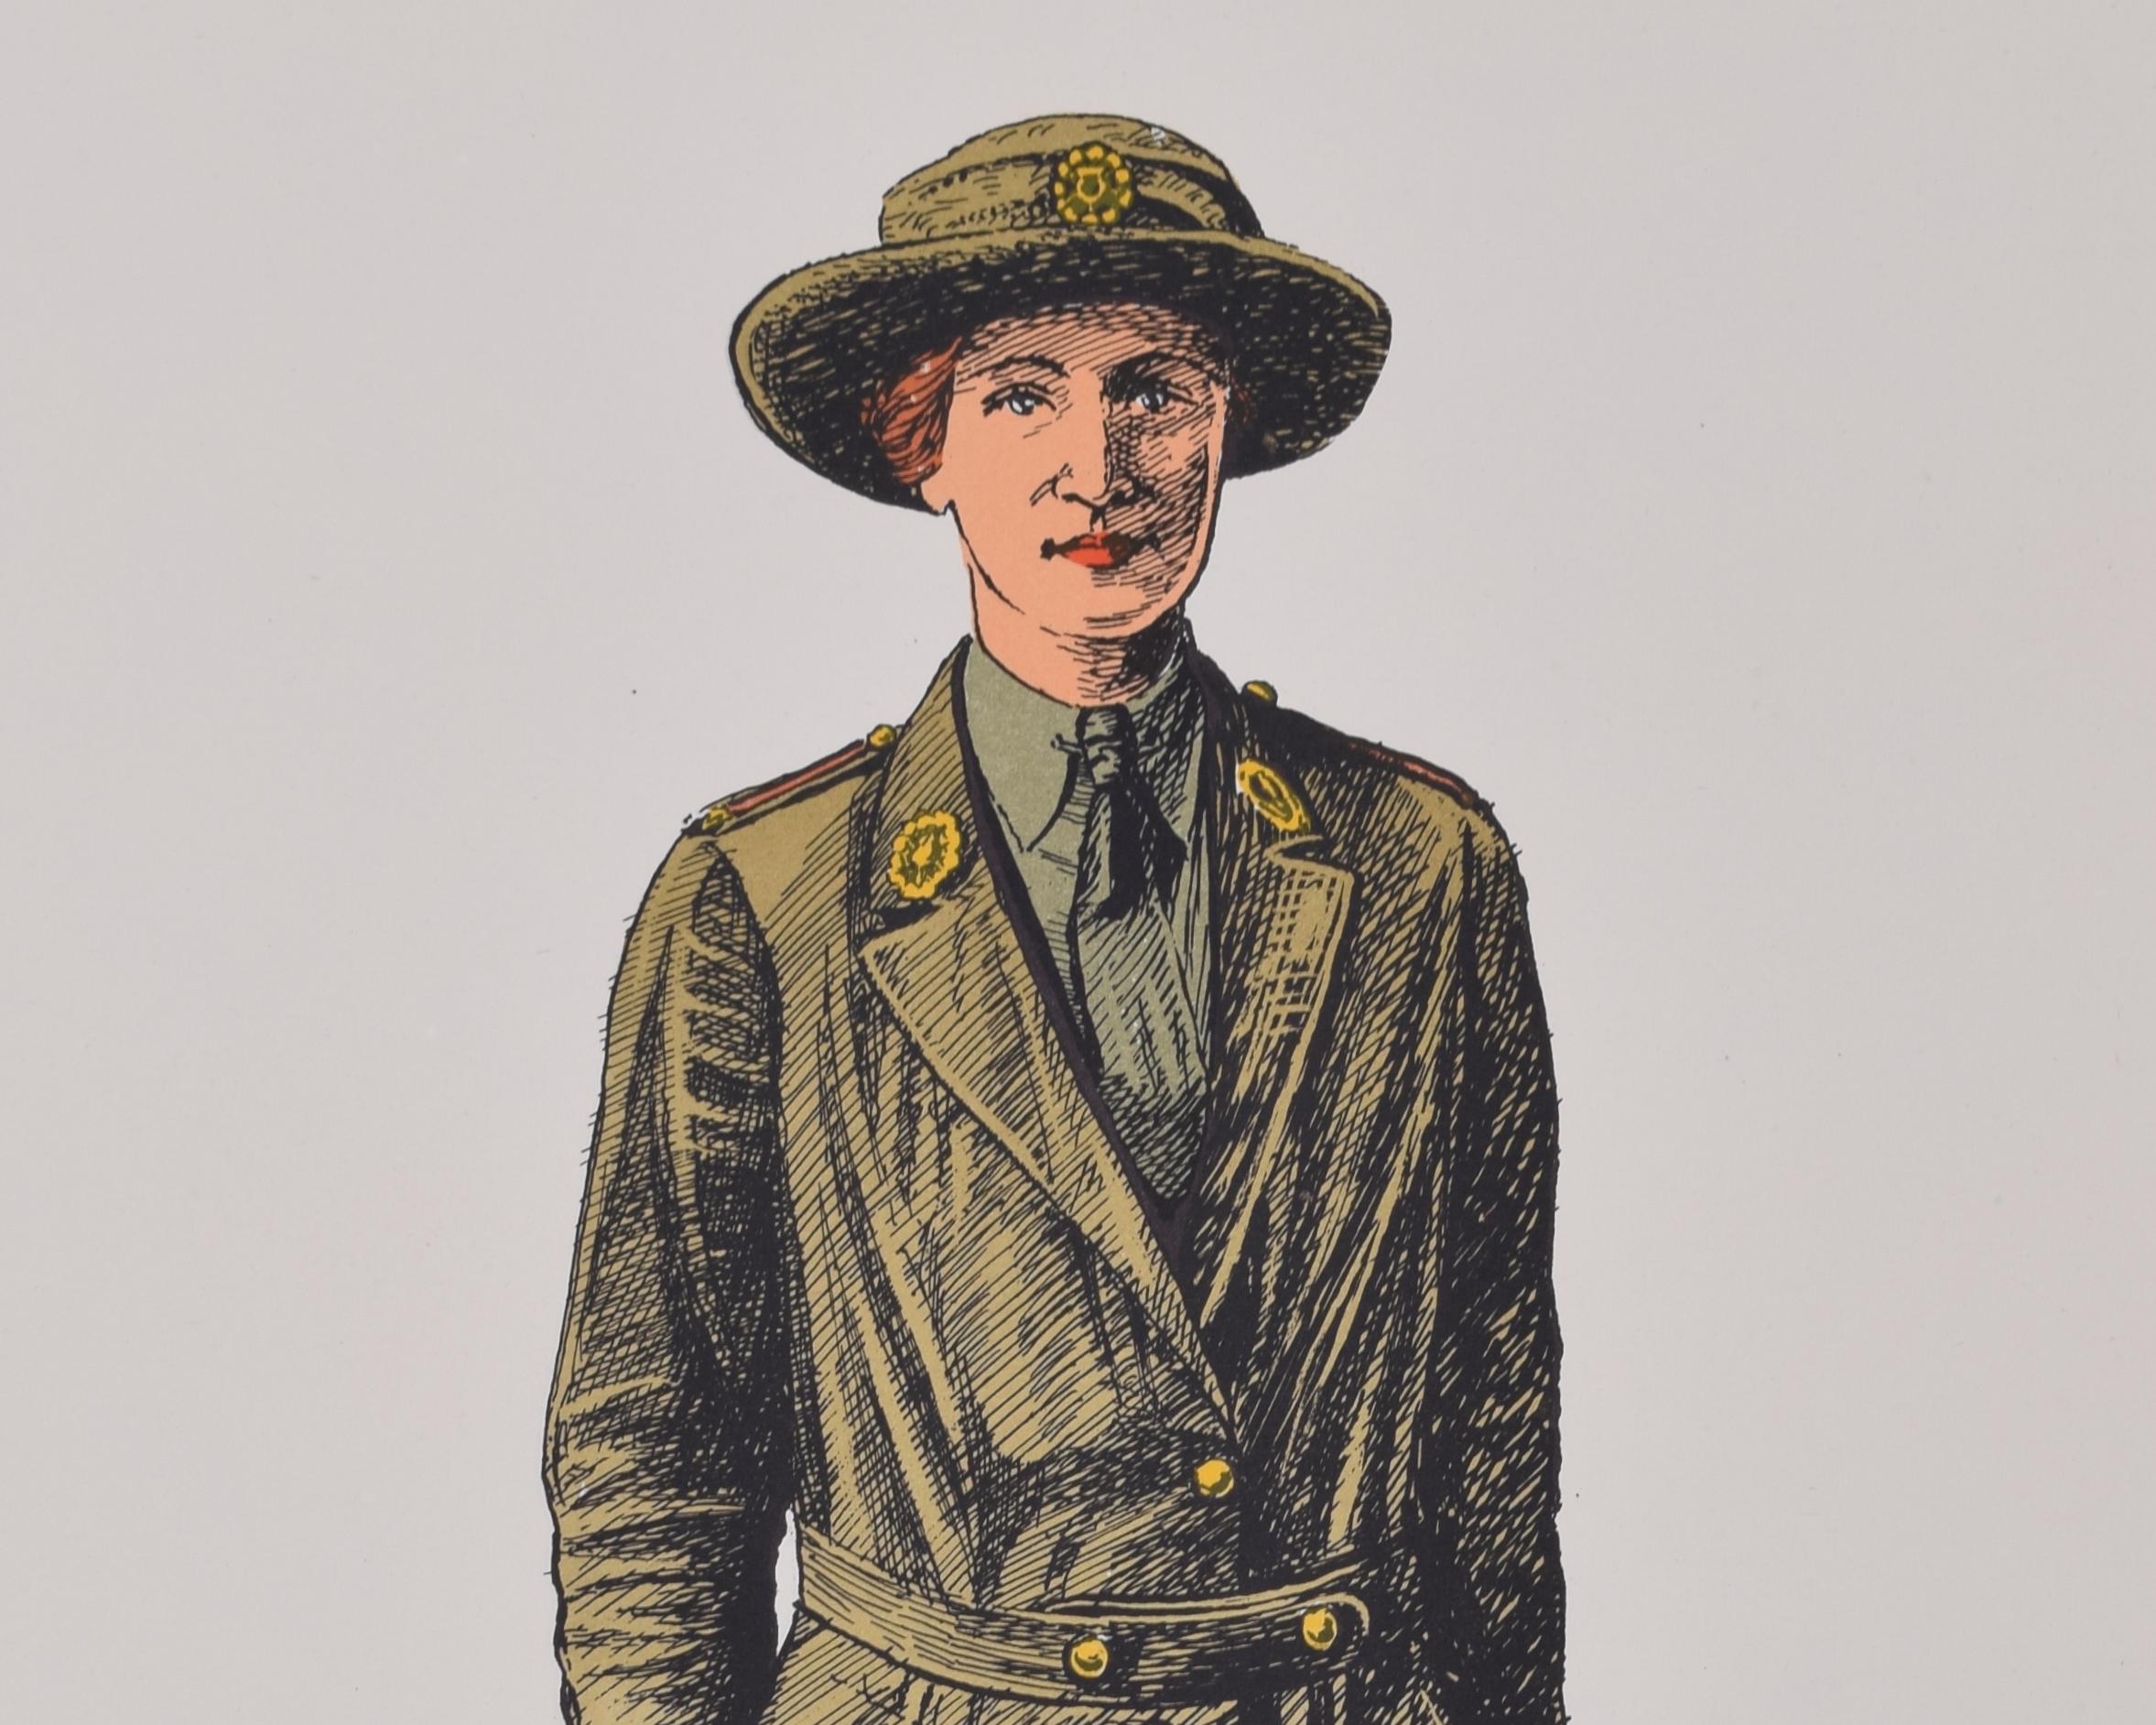 Women's Auxiliary Army Corps Institute of Army Education WW1 uniform lithograph - Print by Unknown